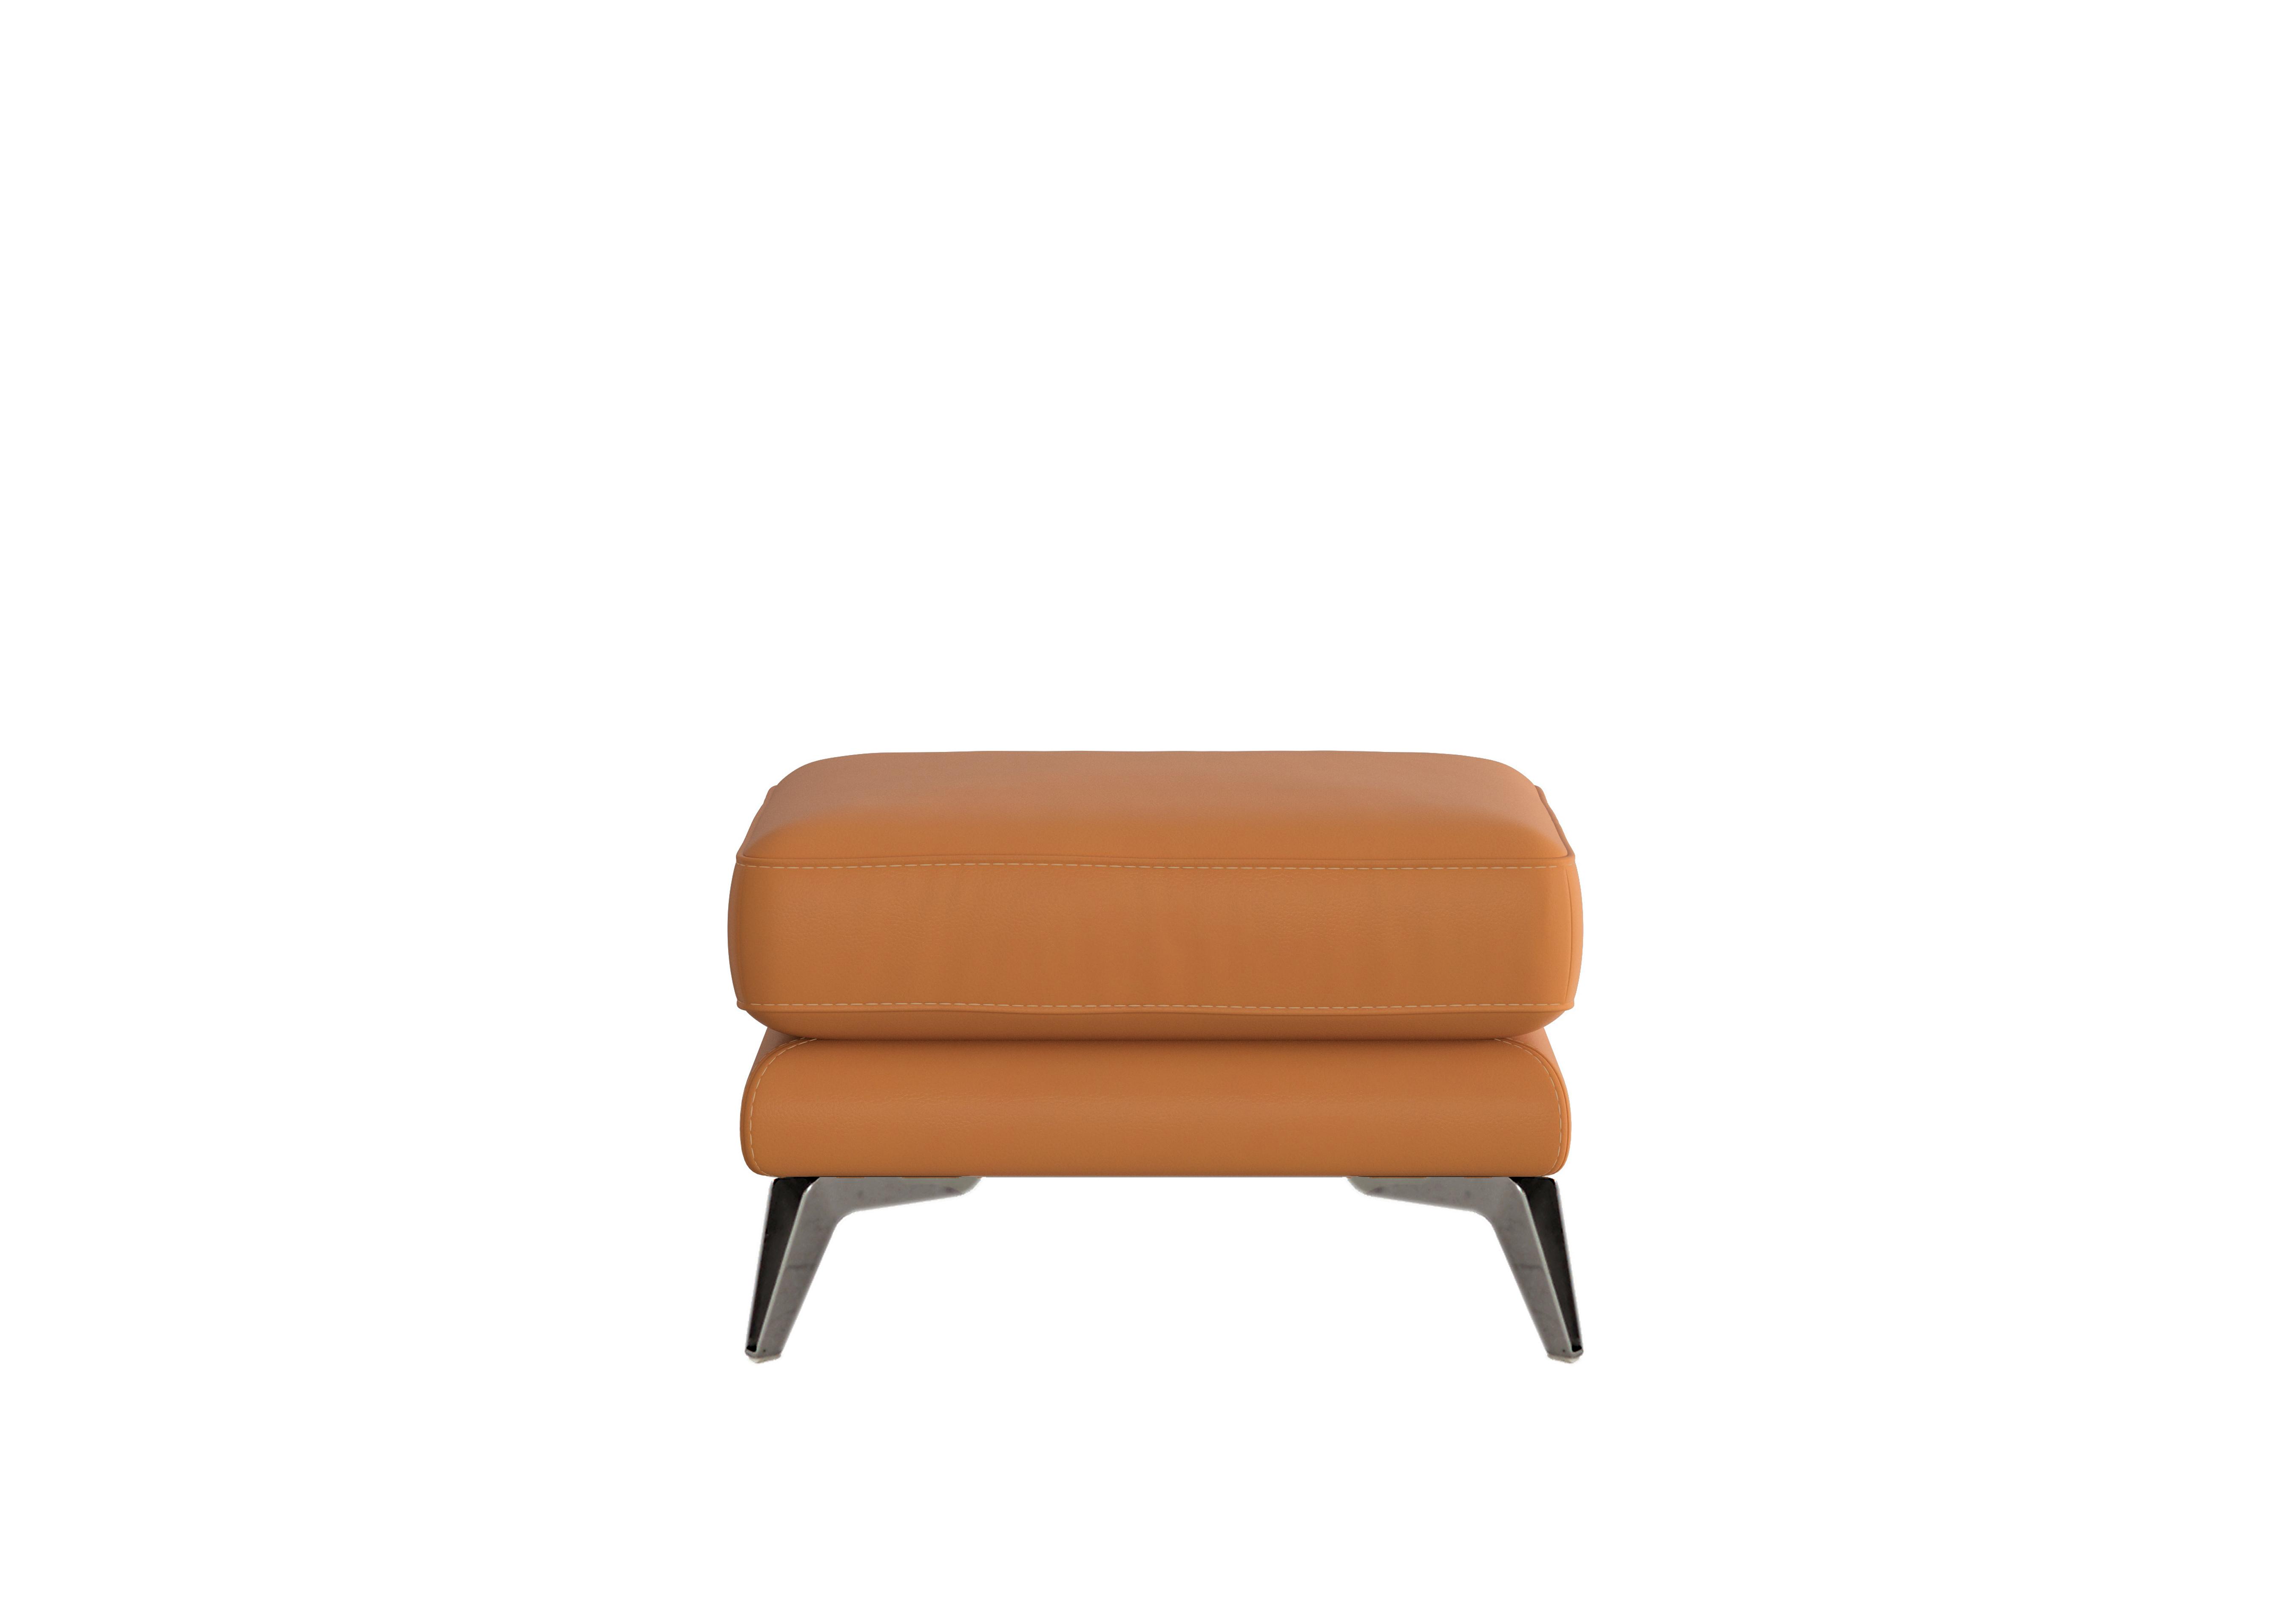 Contempo Leather Footstool in Bv-335e Honey Yellow on Furniture Village